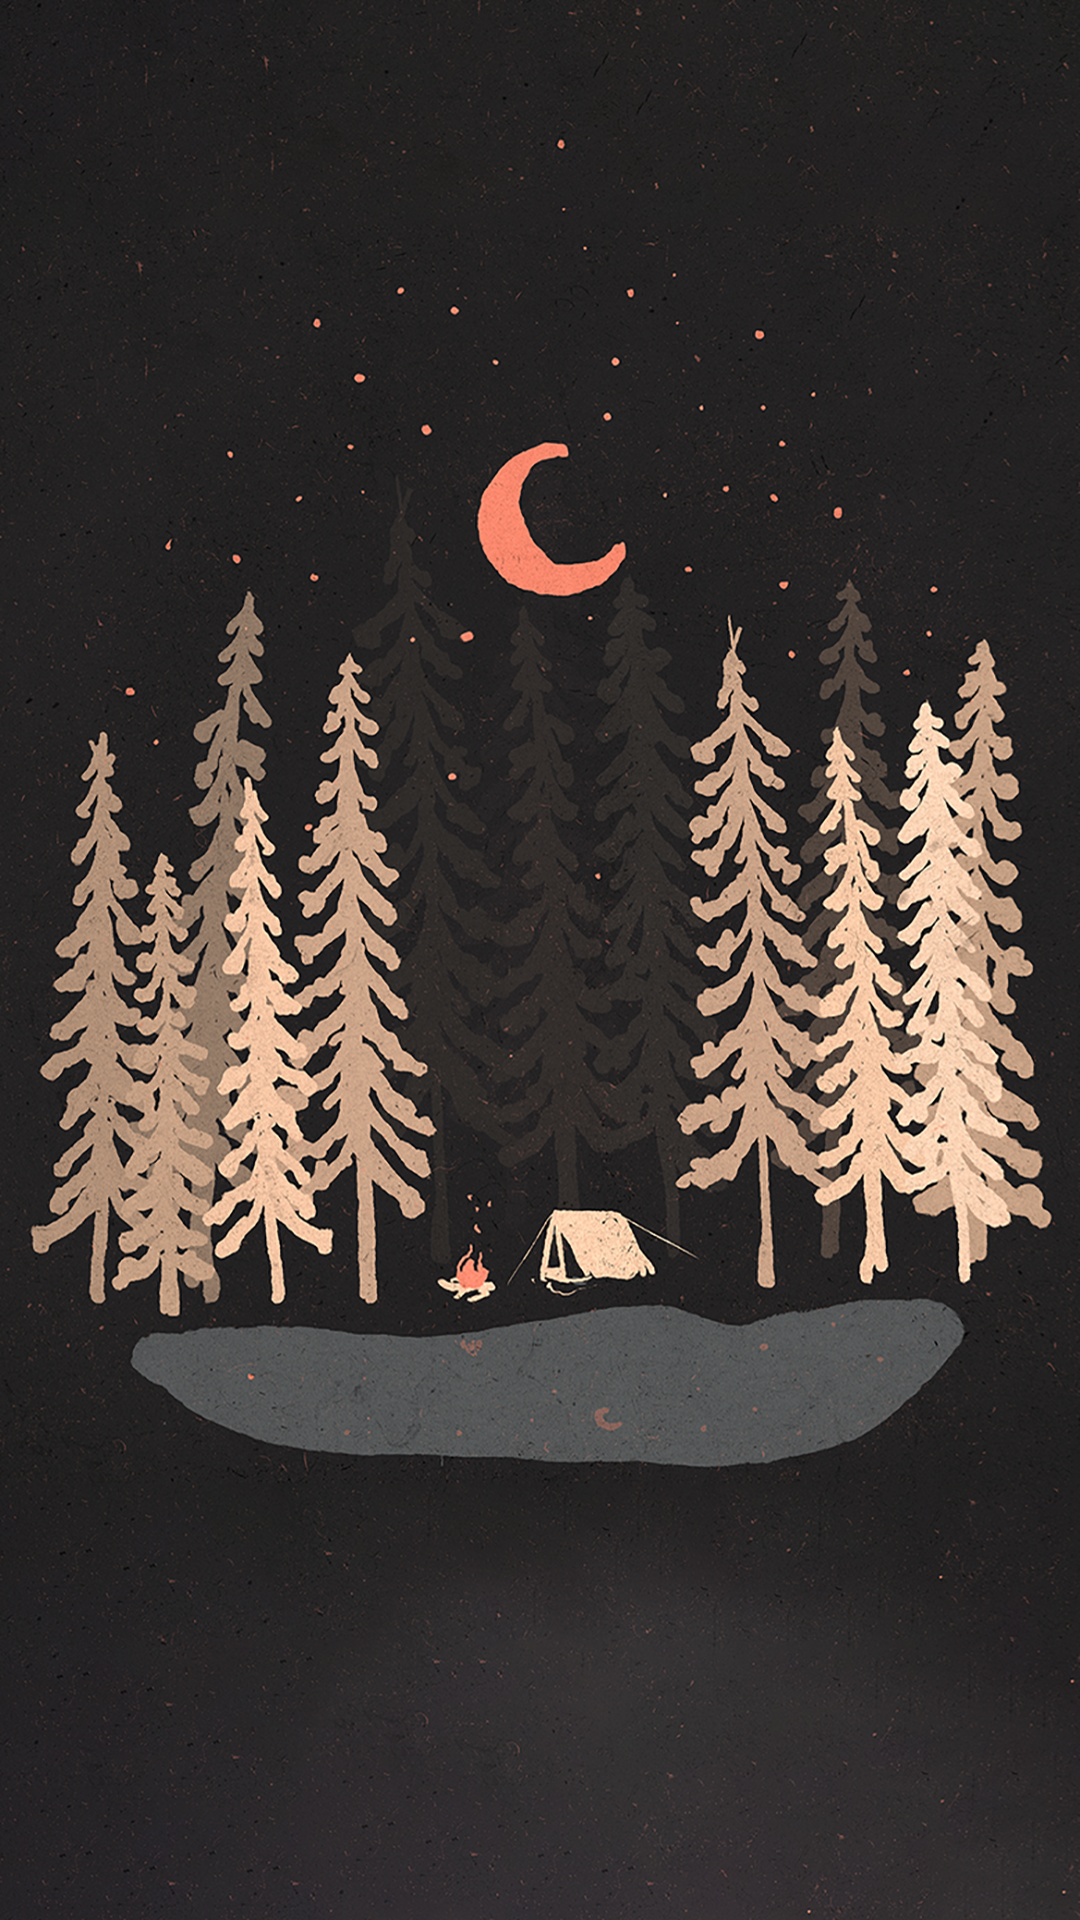 General 1080x1920 digital art portrait display nature trees forest camping water lake tent fire Moon stars night simple background